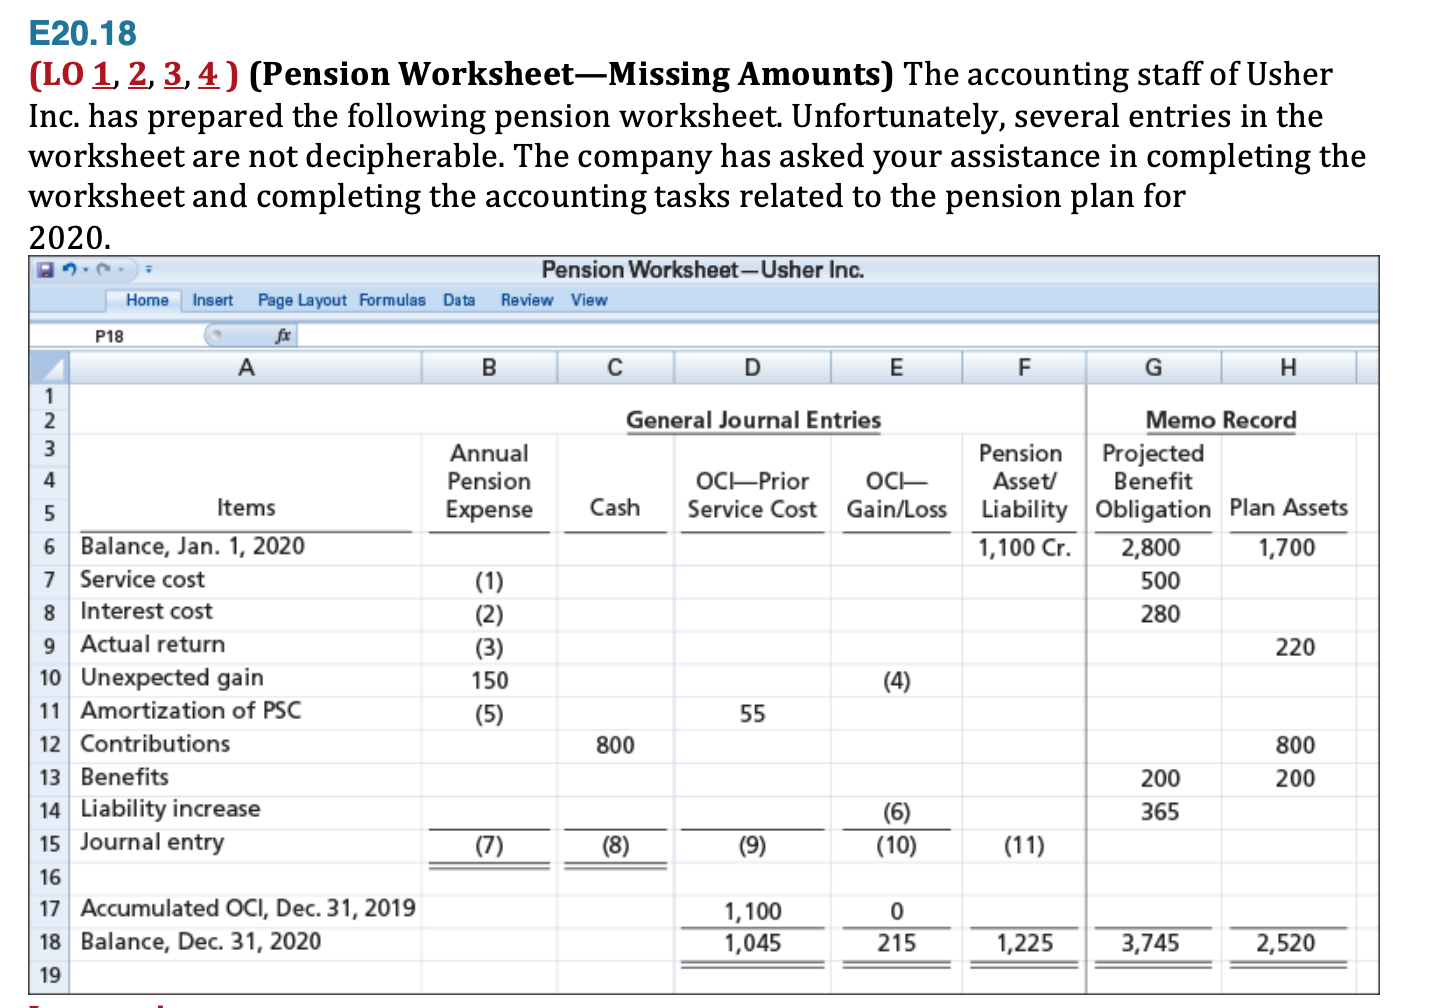 E20.18
(LO 1, 2, 3, 4) (Pension Worksheet-Missing Amounts) The accounting staff of Usher
Inc. has prepared the following pension worksheet. Unfortunately, several entries in the
worksheet are not decipherable. The company has asked your assistance in completing the
worksheet and completing the accounting tasks related to the pension plan for
2020.
Pension Worksheet-Usher Inc.
Home
Insert
Page Layout Formulas Data
Review View
P18
Н
General Journal Entries
Memo Record
Pension
Asset/
Annual
Projected
Benefit
4
Pension
OC-Prior
OC-
Items
Expense
Cash
Service Cost Gain/Loss Liability Obligation Plan Assets
6 Balance, Jan. 1, 2020
7 Service cost
8 Interest cost
1,100 Cr.
2,800
1,700
500
(1)
(2)
280
9 Actual return
10 Unexpected gain
(3)
220
150
(4)
11 Amortization of PSC
(5)
55
12 Contributions
800
800
13 Benefits
200
200
14 Liability increase
15 Journal entry
(6)
(10)
365
(7)
(8)
(9)
(11)
16
17 Accumulated OCI, Dec. 31, 2019
1,100
1,045
18 Balance, Dec. 31, 2020
215
1,225
3,745
2,520
19
